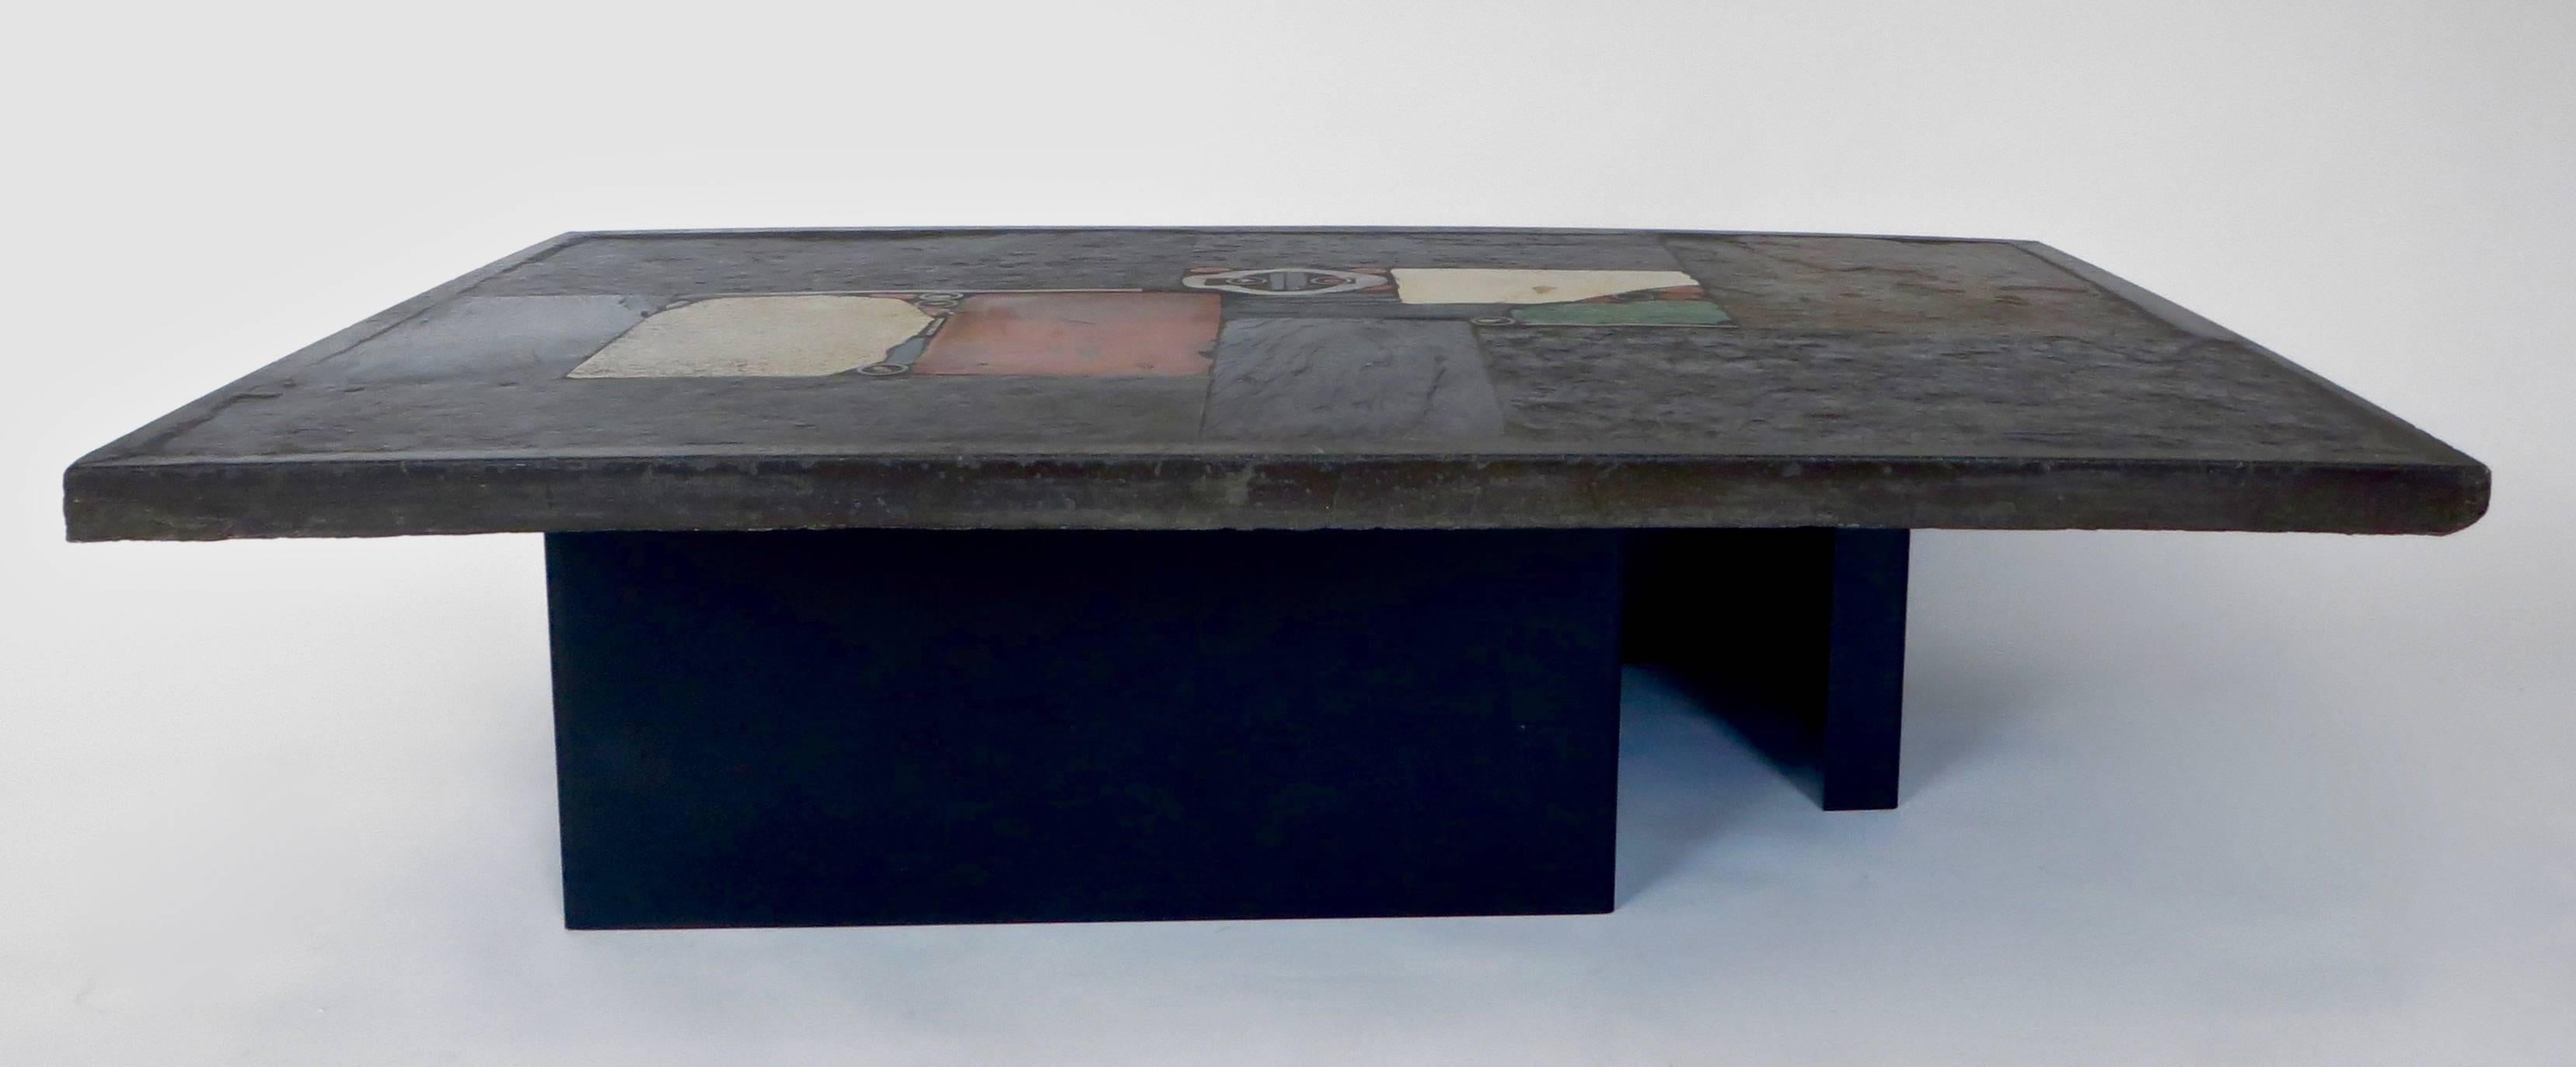 This is a one off unique early piece made of different colored stones, concrete, slate and finished with brass details. Signed by the artist in a brass plate Paul Kingma 1974 Cast concrete plateau, inlaid with stone, ceramic and found object. 47.25